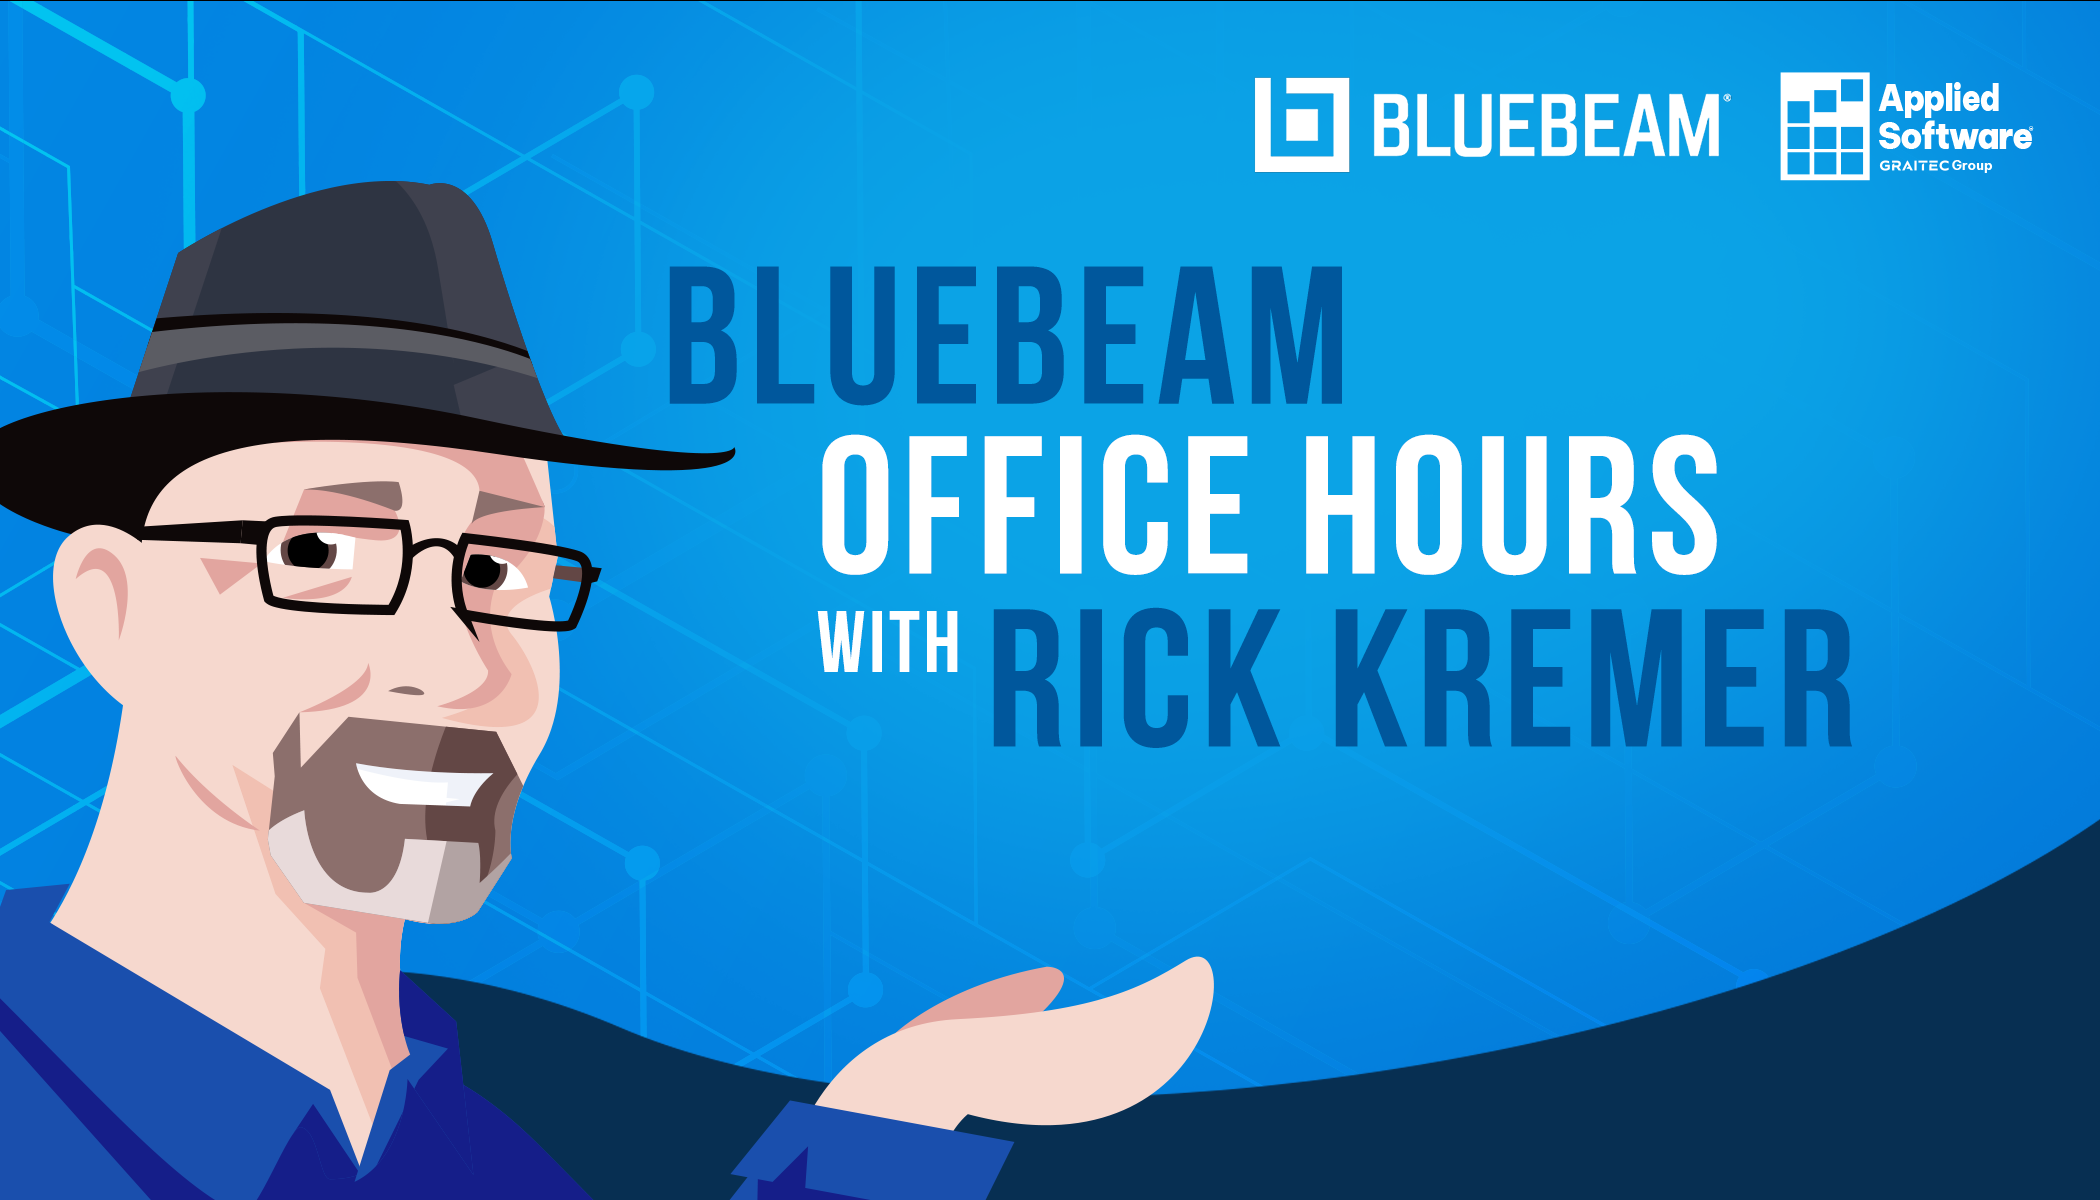 Bluebeam Office Hours with Rick Kremer on Thursday, January 19th